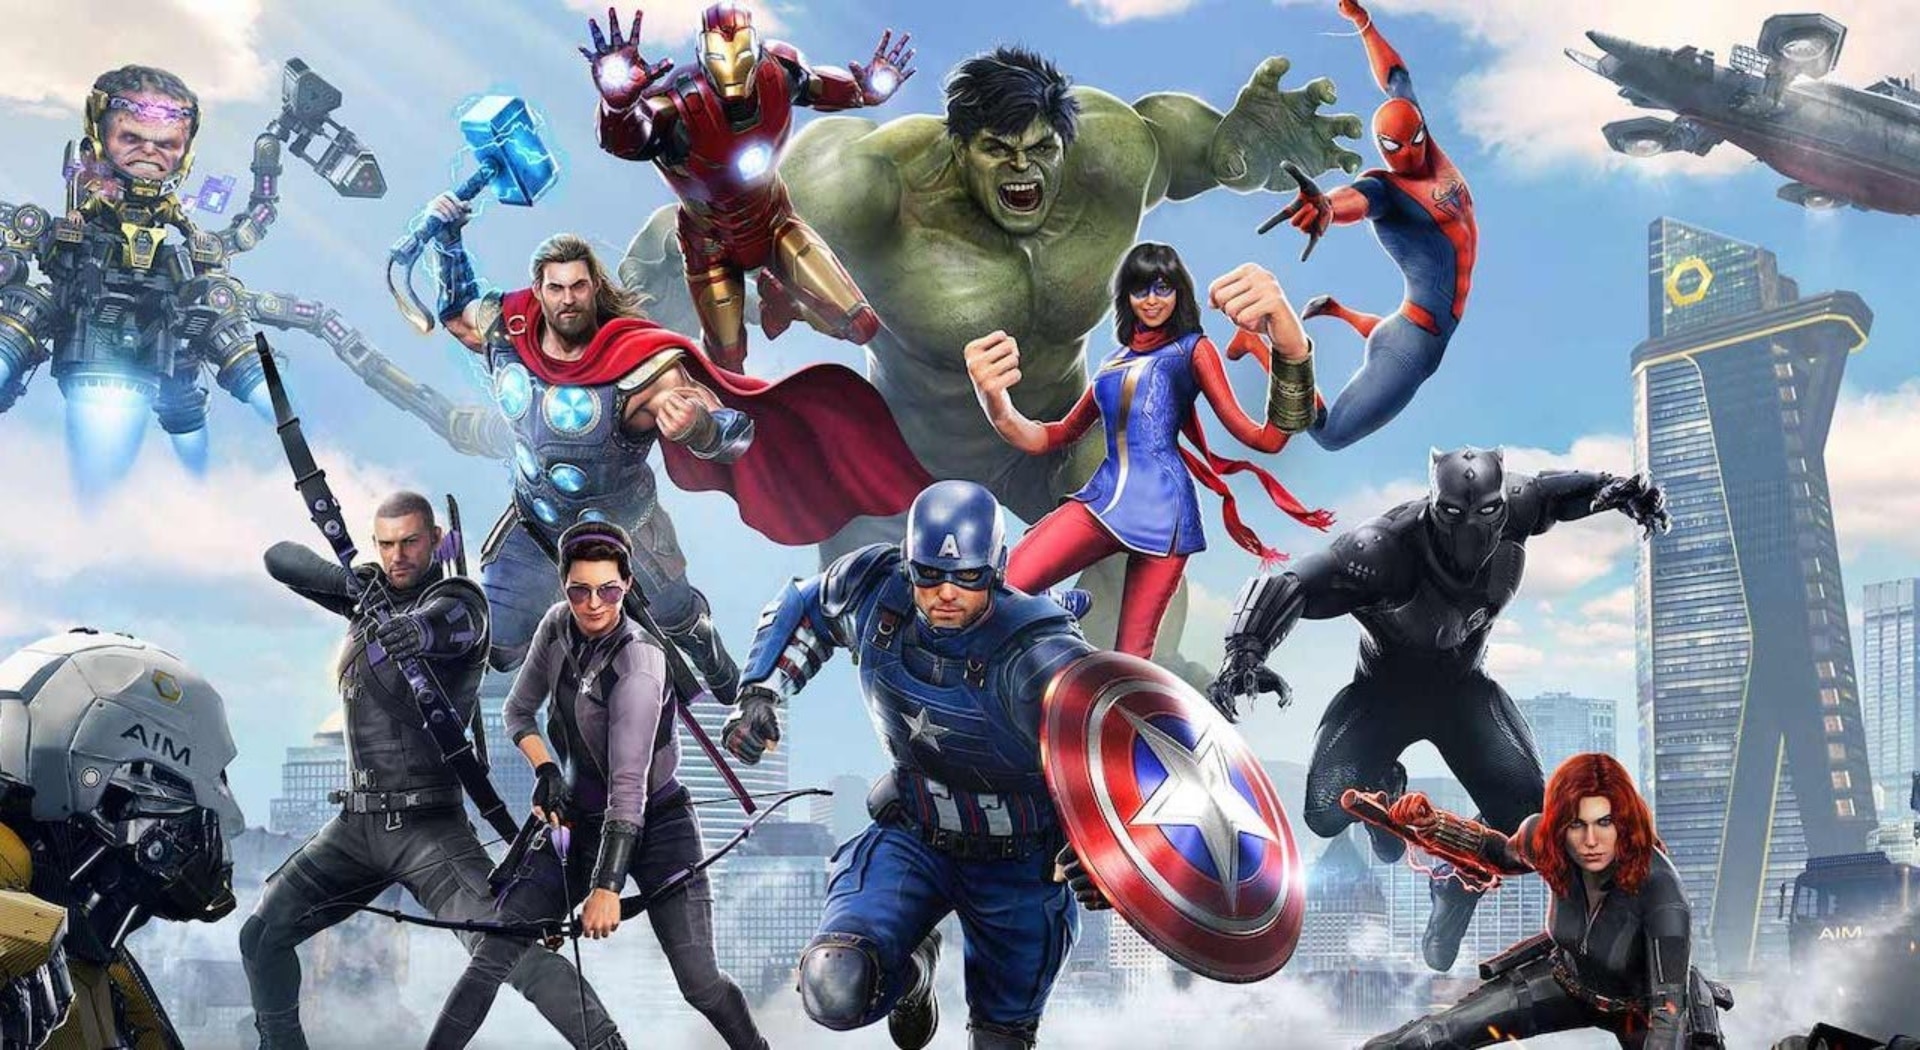 Square Enix Has Lost Around $200 Million On Marvel's Avengers And Guardians Of The Galaxy, GamersRD